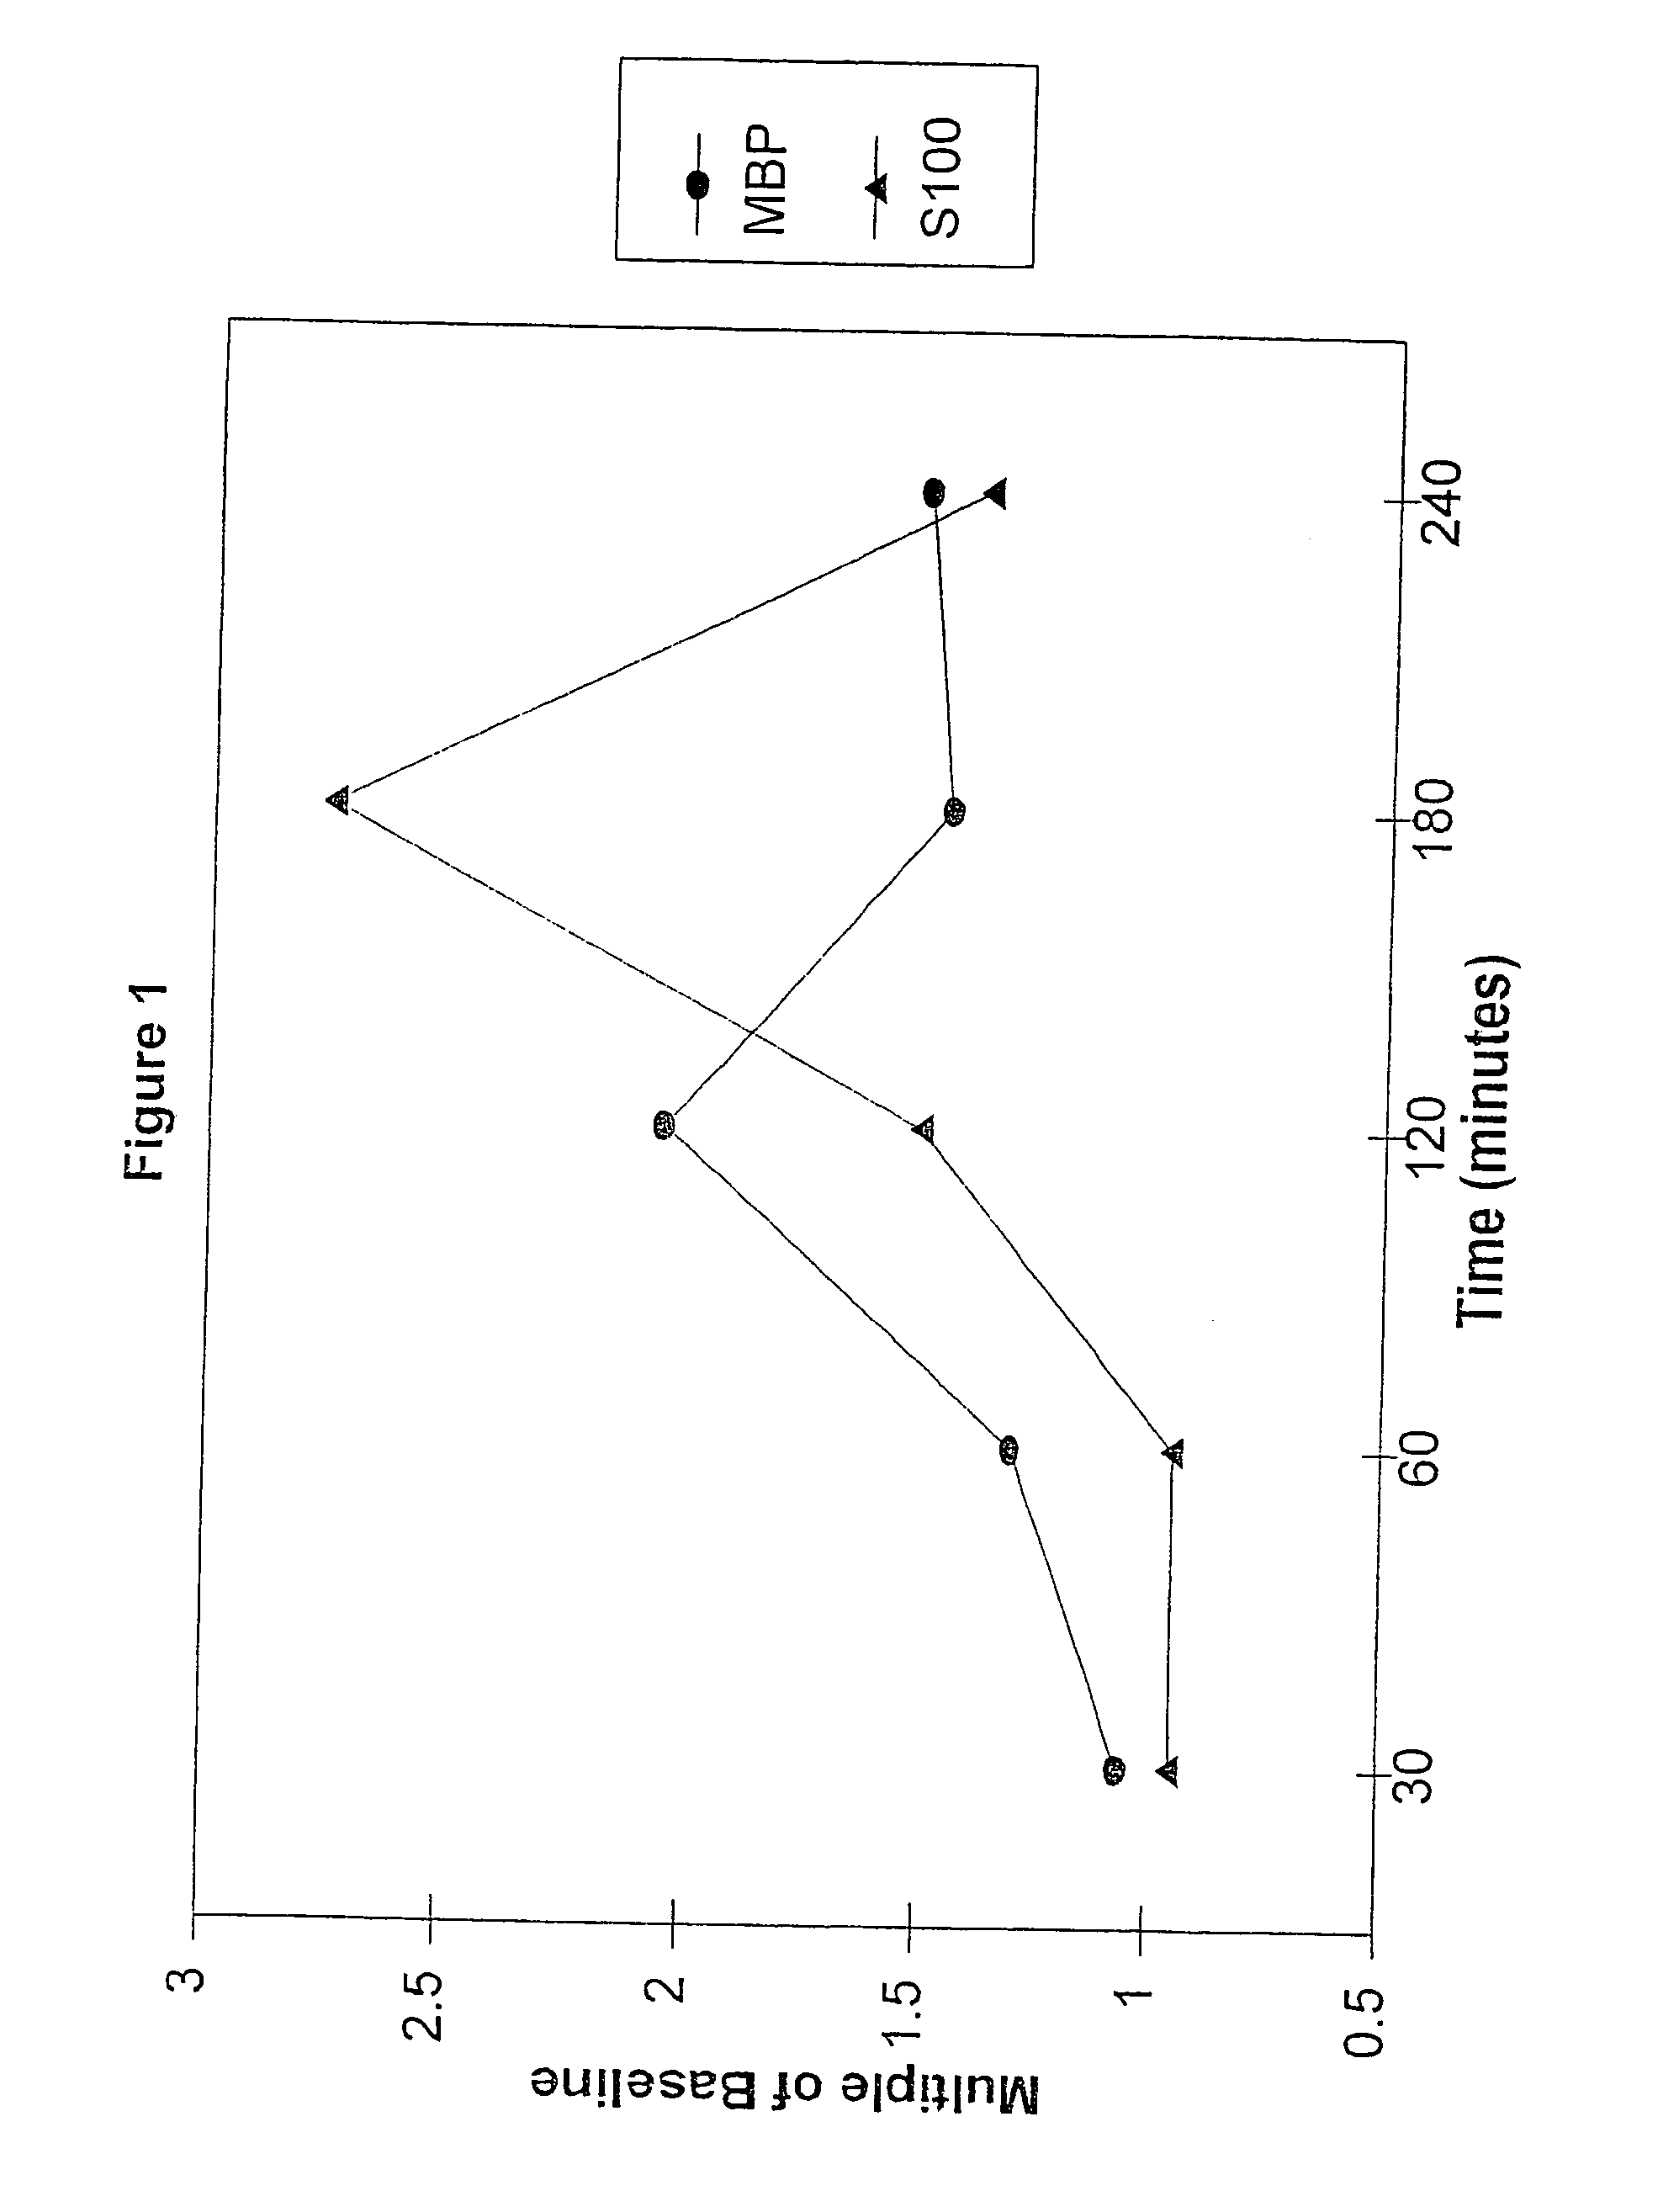 Method for diagnosing and distinguishing stroke and diagnostic devices for use therein